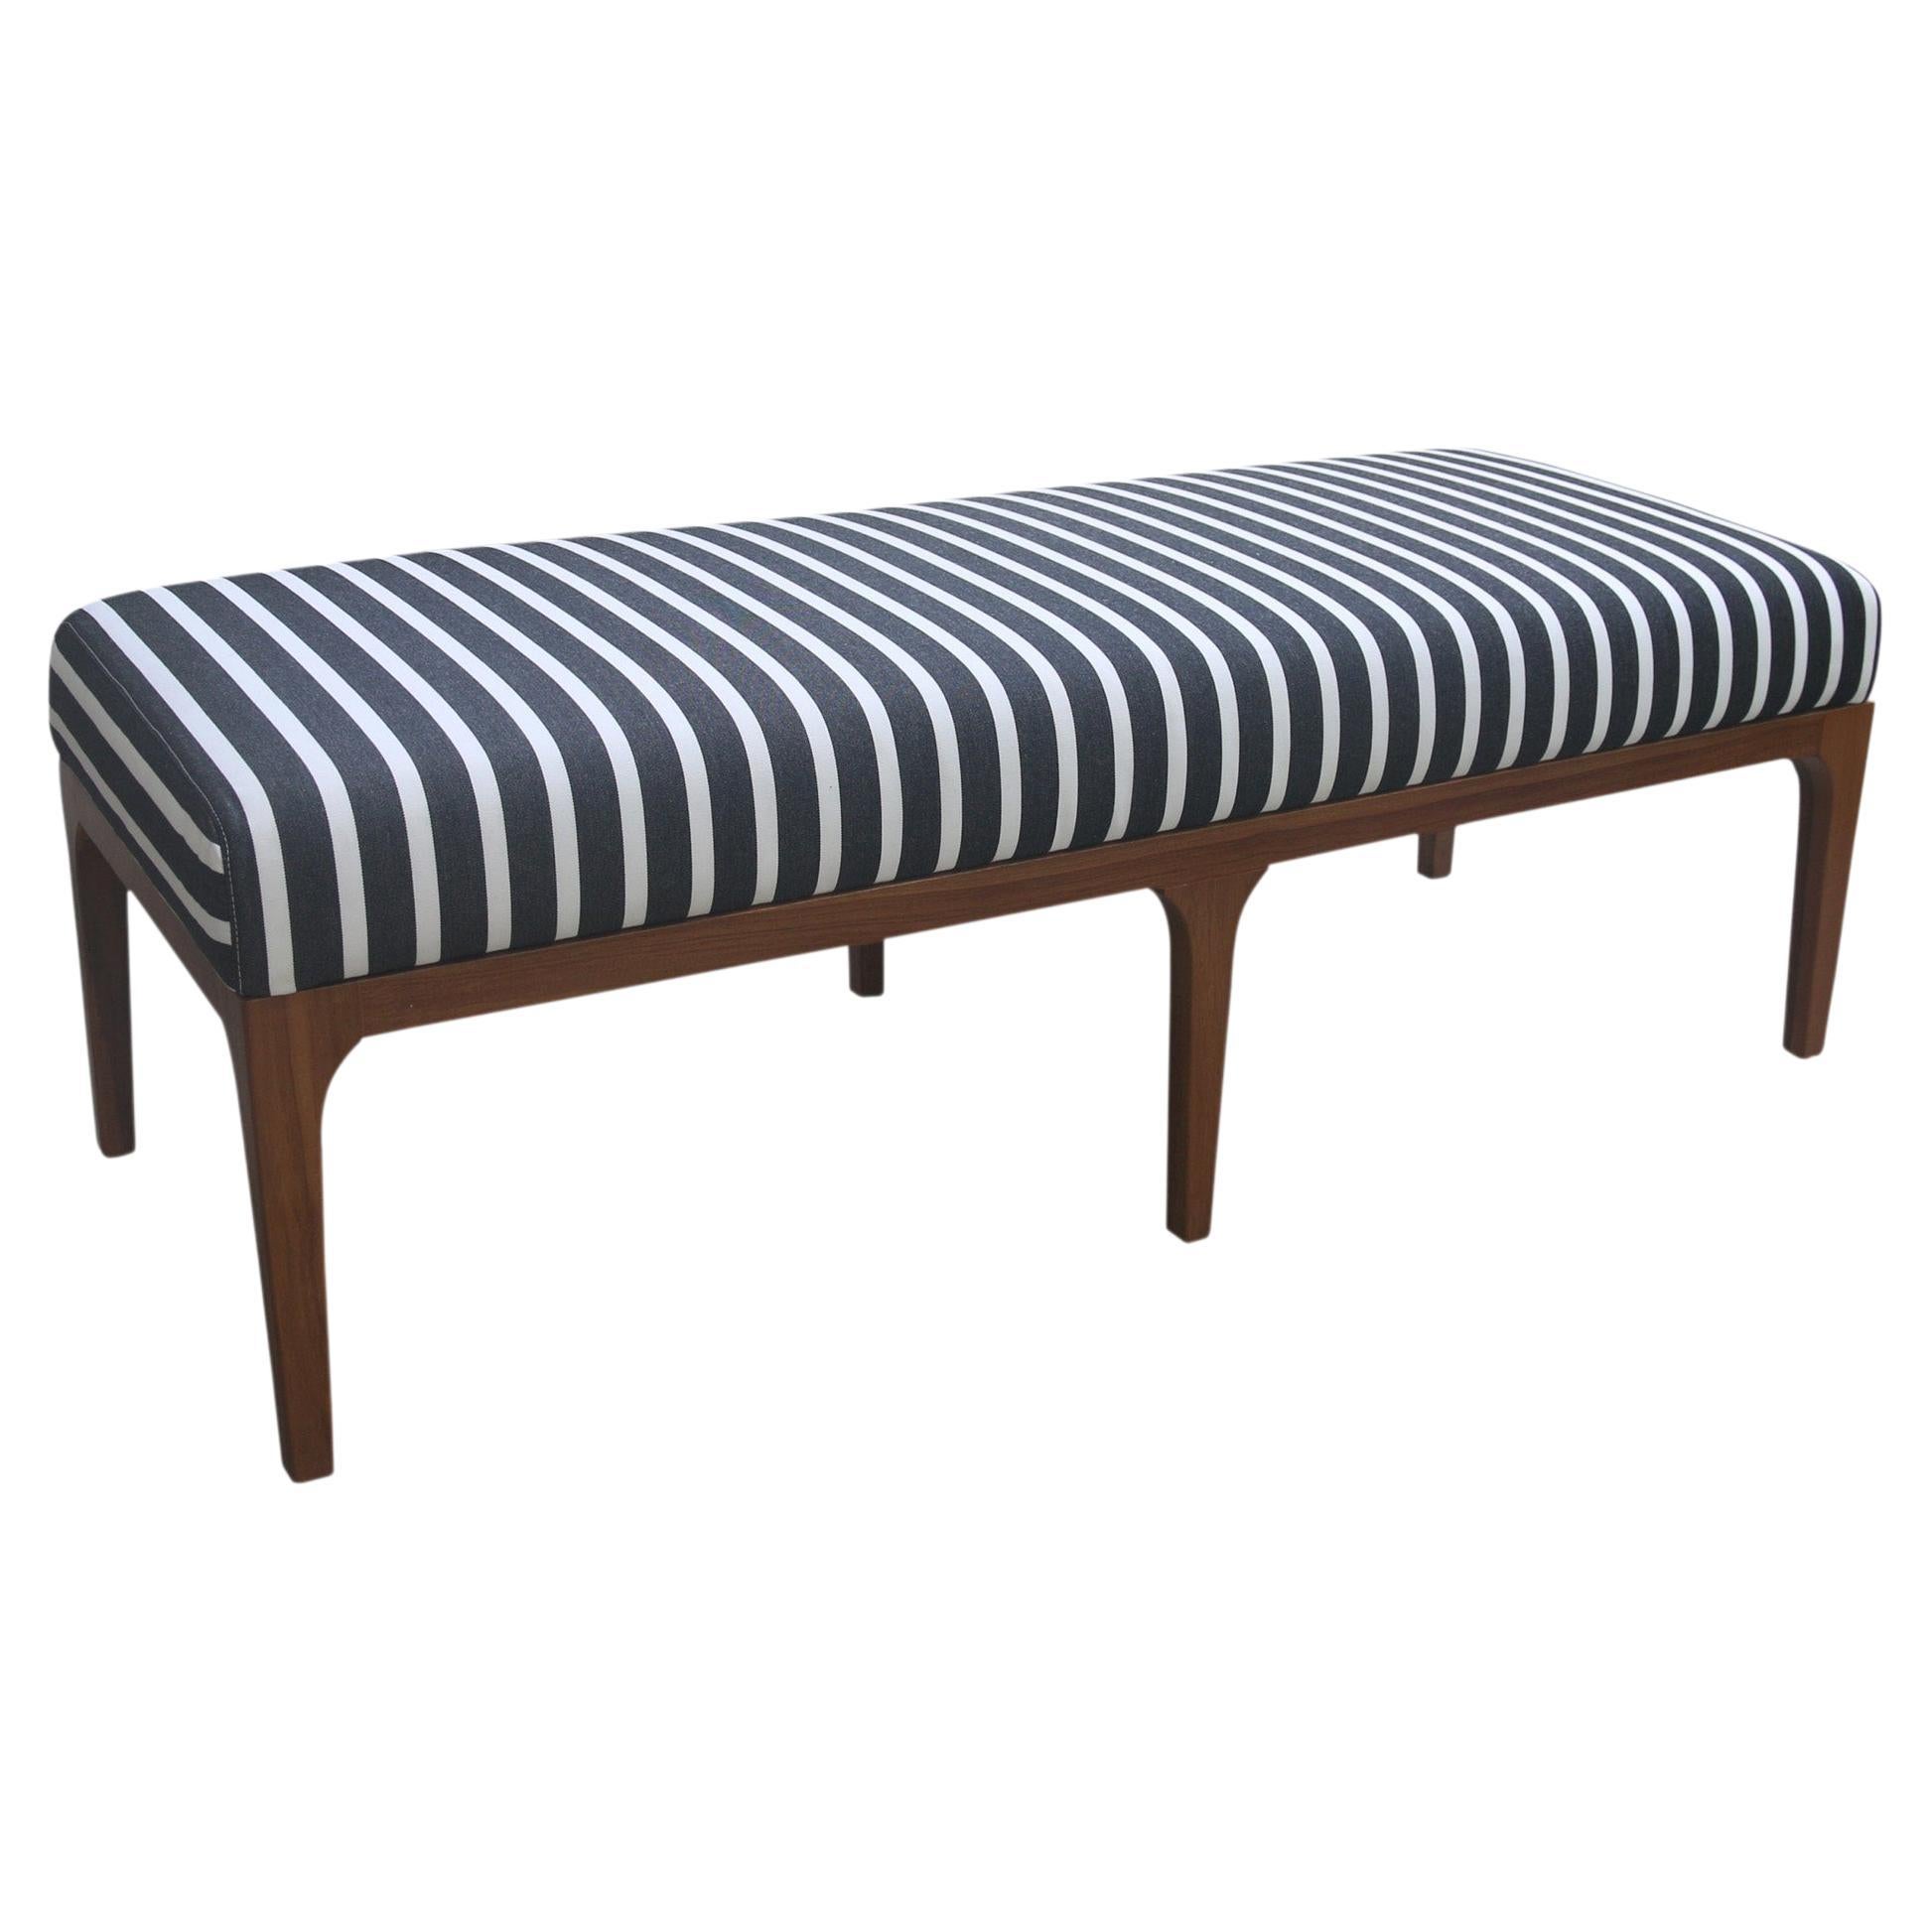 Bench in Golden Brown Finish with Black and White Stripe Fabric For Sale